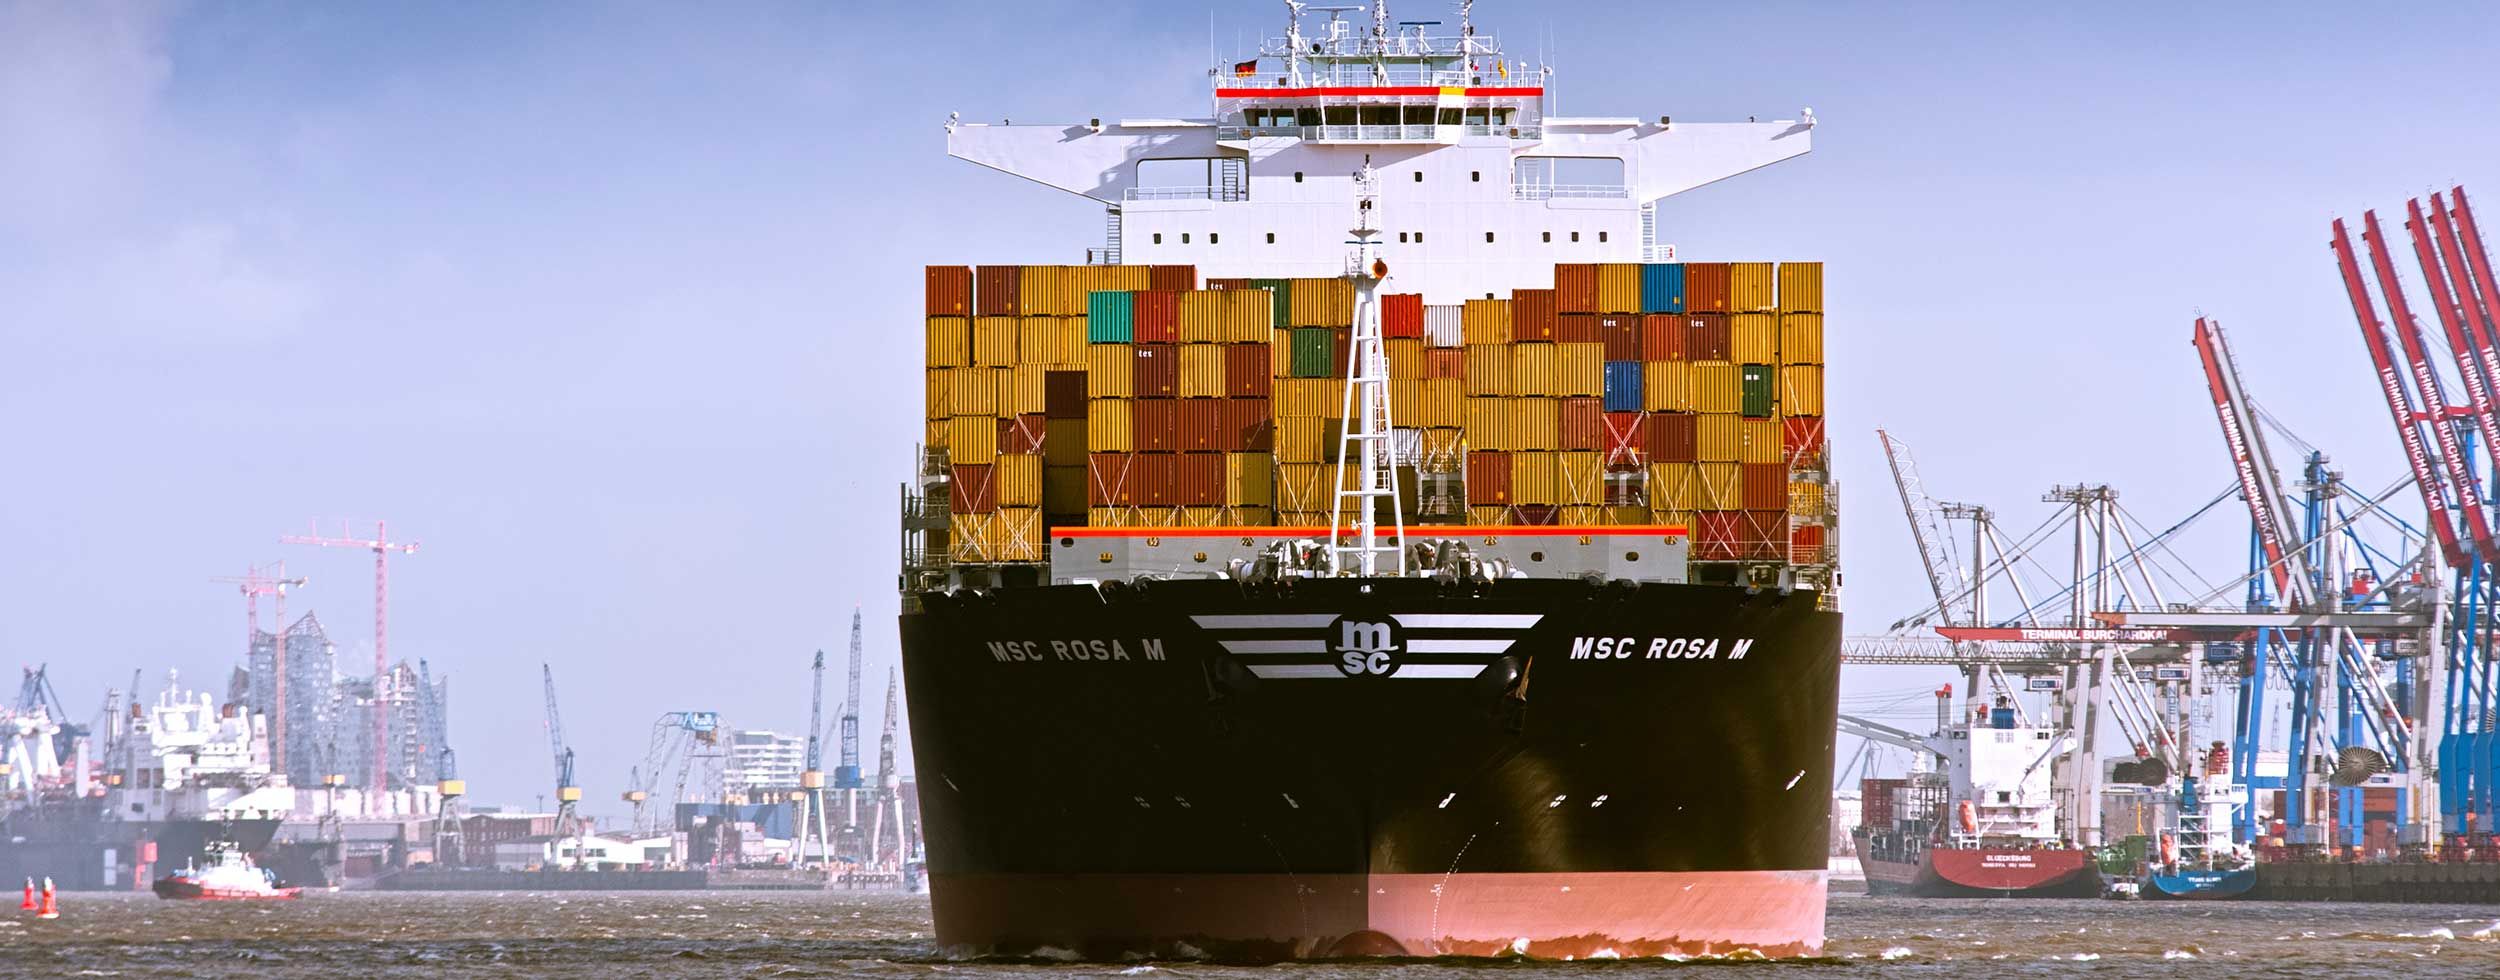 Image: Container ship at the harbour